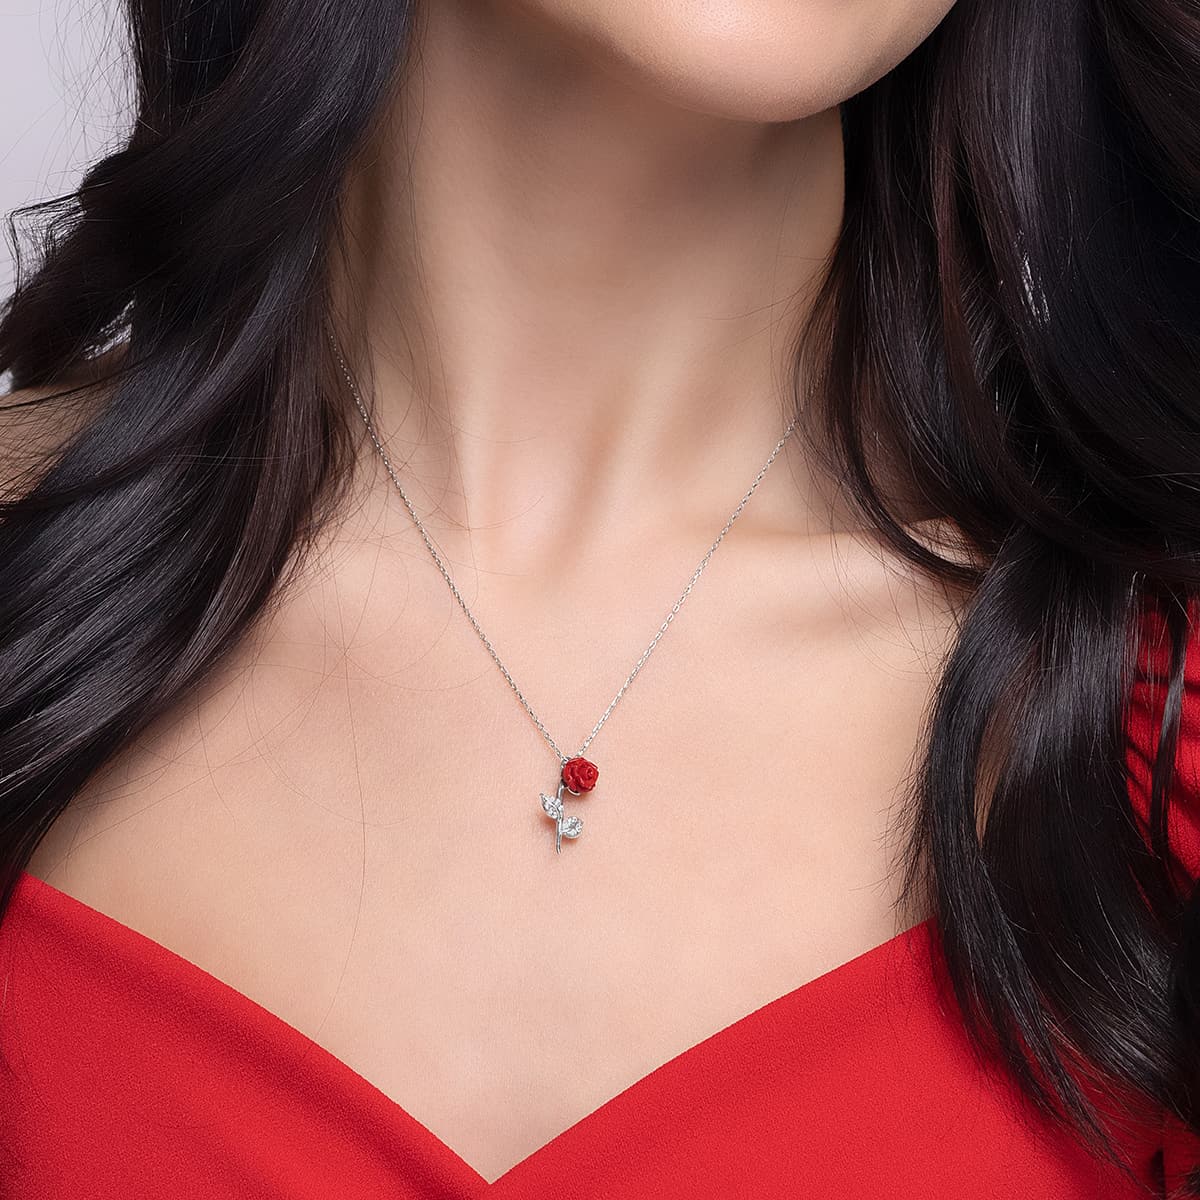 Beautiful Wife On Our Anniversary - Red Rose Necklace Gift Set